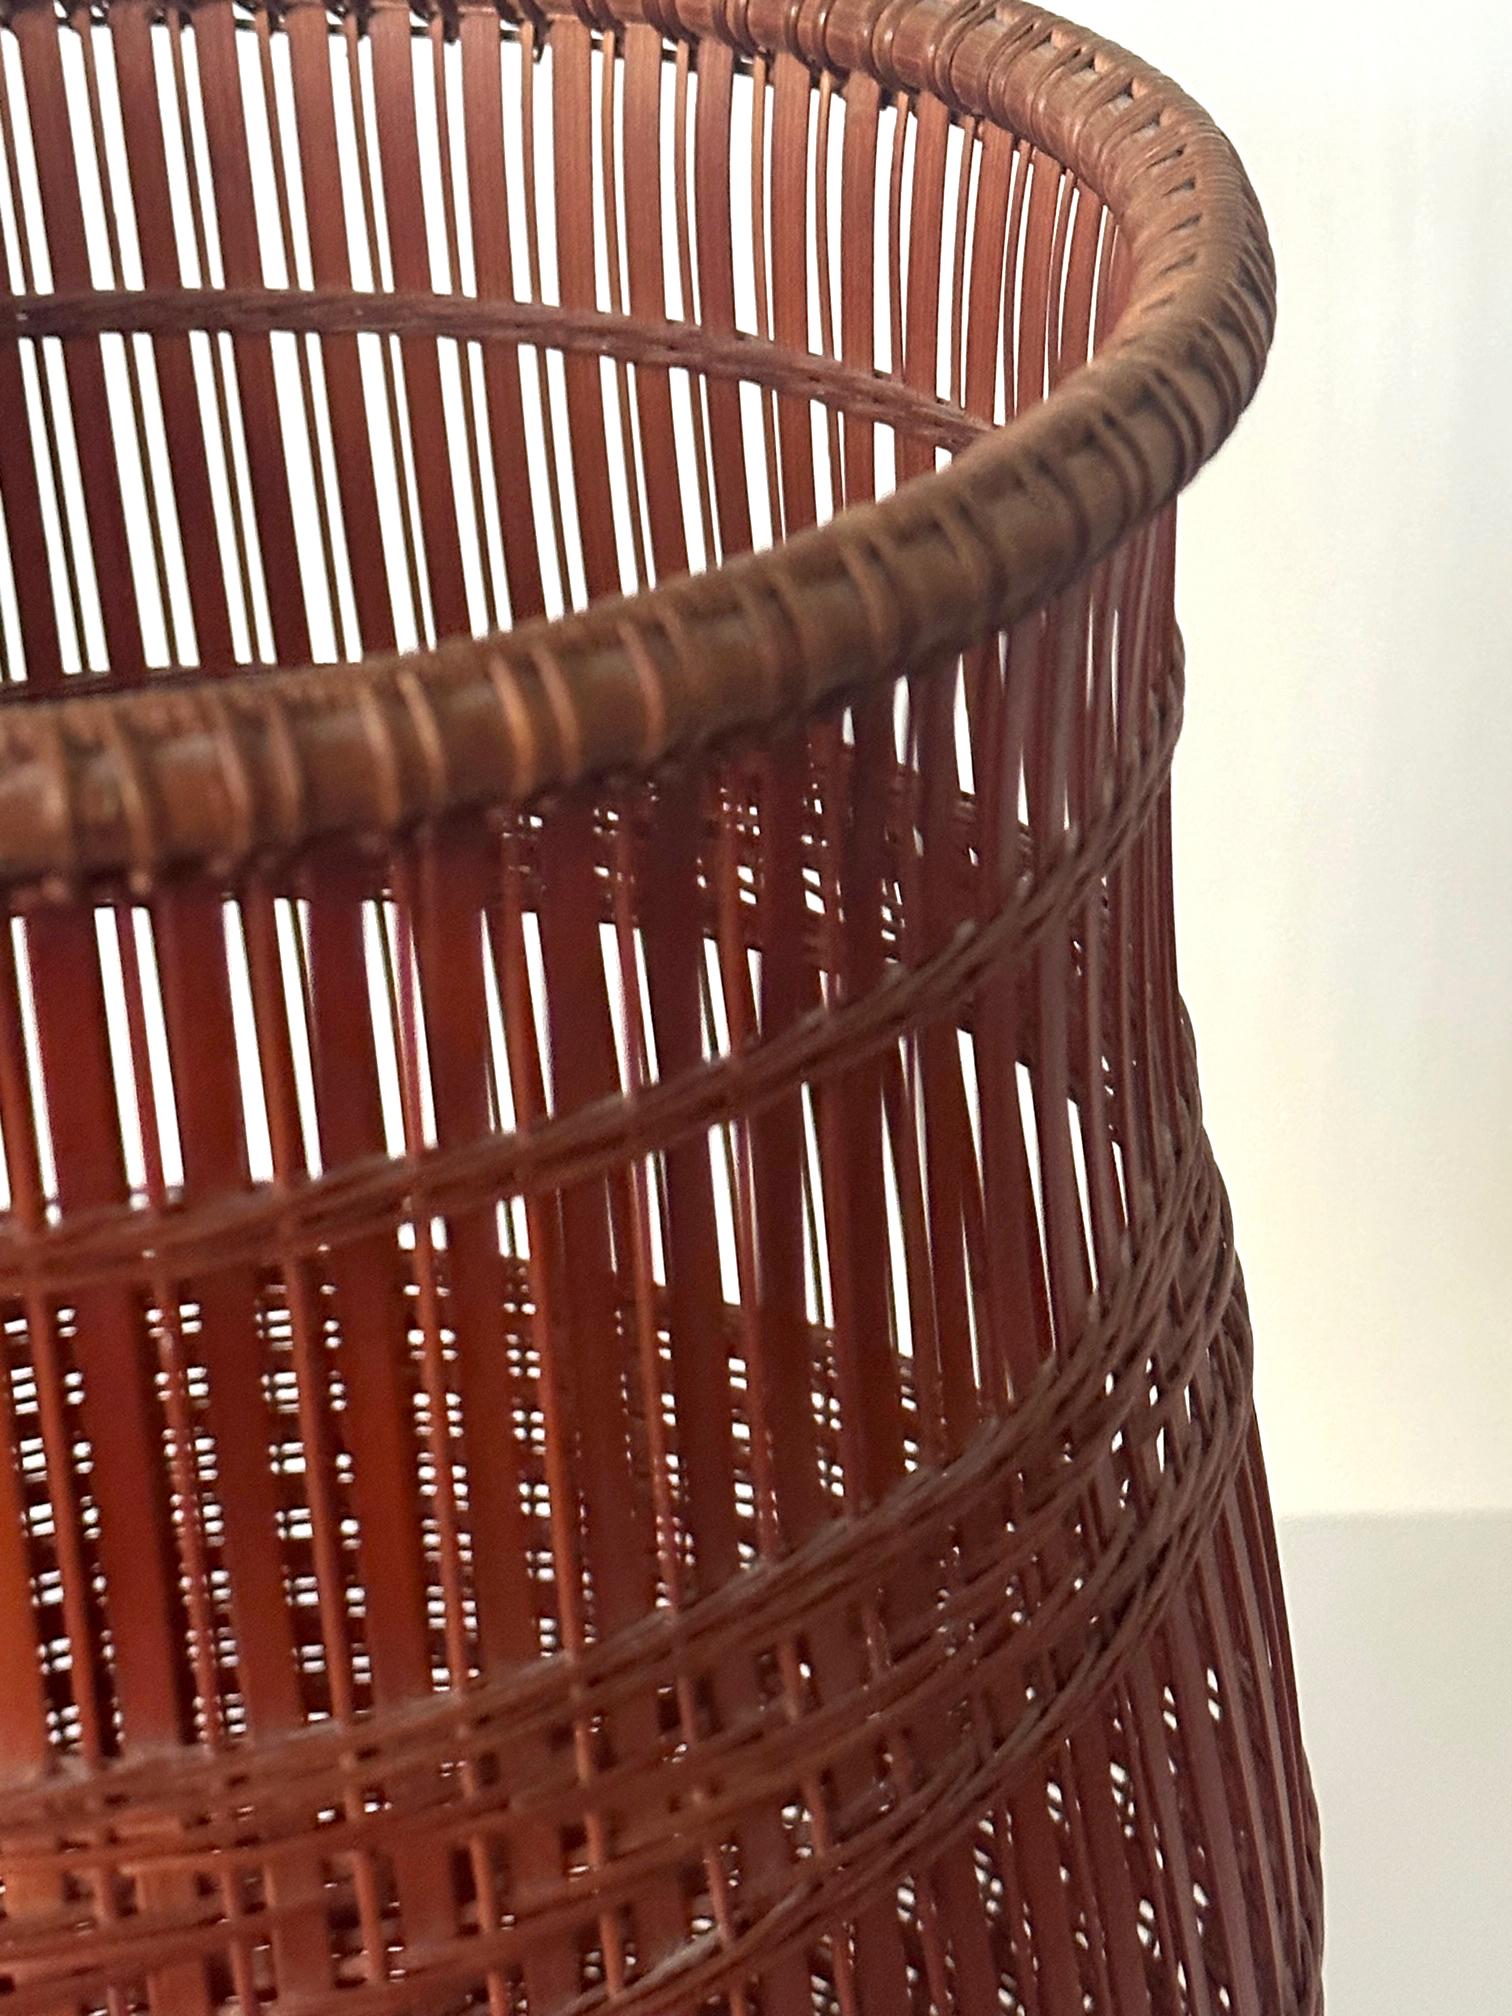 Japanese Contemporary Bamboo Basket by Abe Motoshi For Sale 2